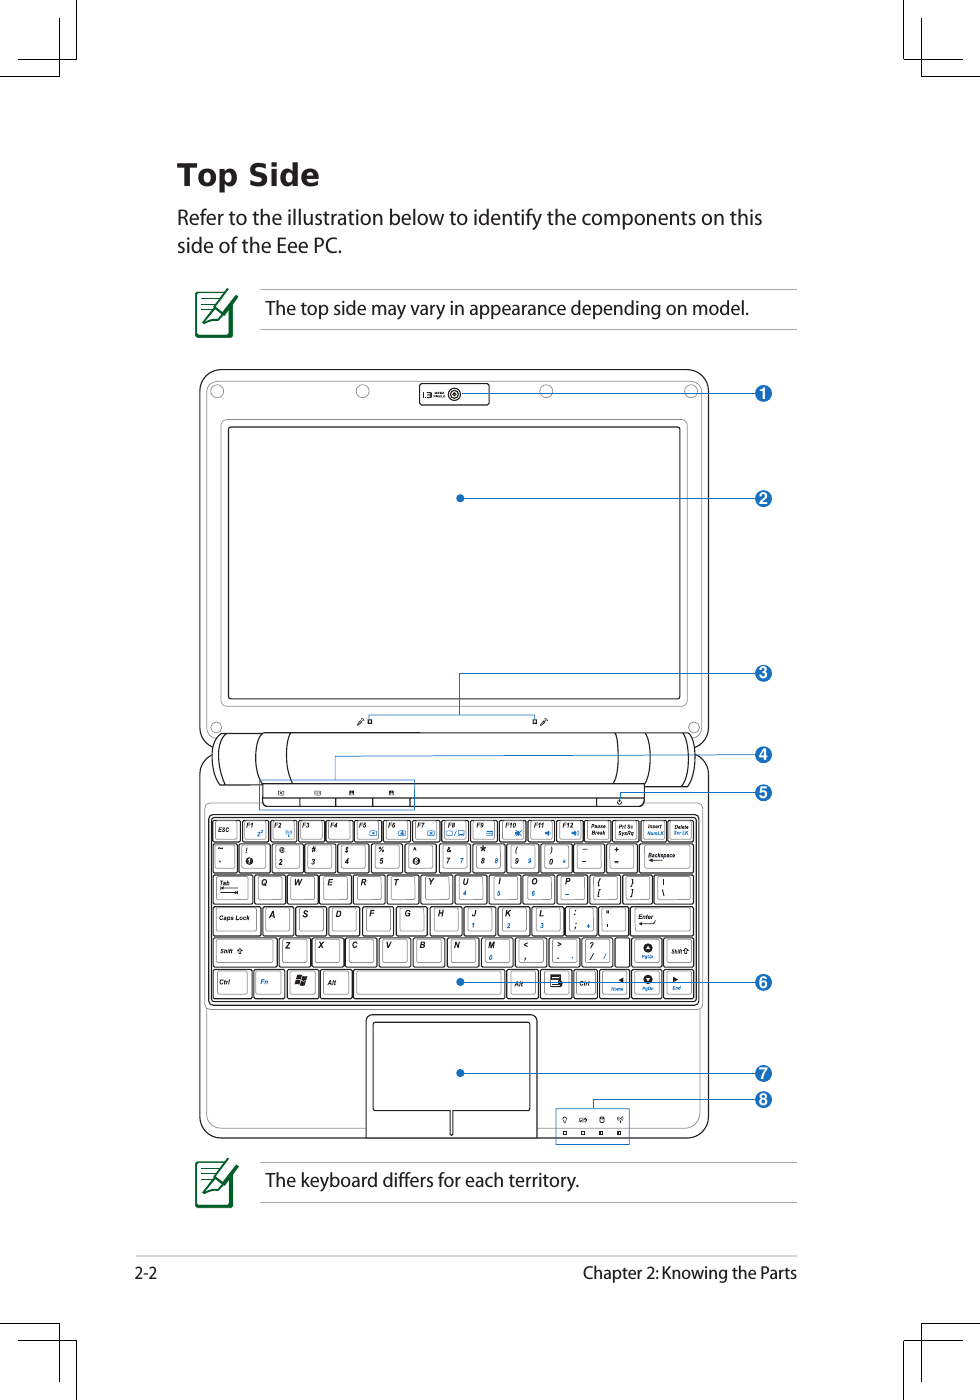 2-2Chapter 2: Knowing the PartsTop SideRefer to the illustration below to identify the components on this side of the Eee PC.The keyboard differs for each territory.23167584The top side may vary in appearance depending on model.